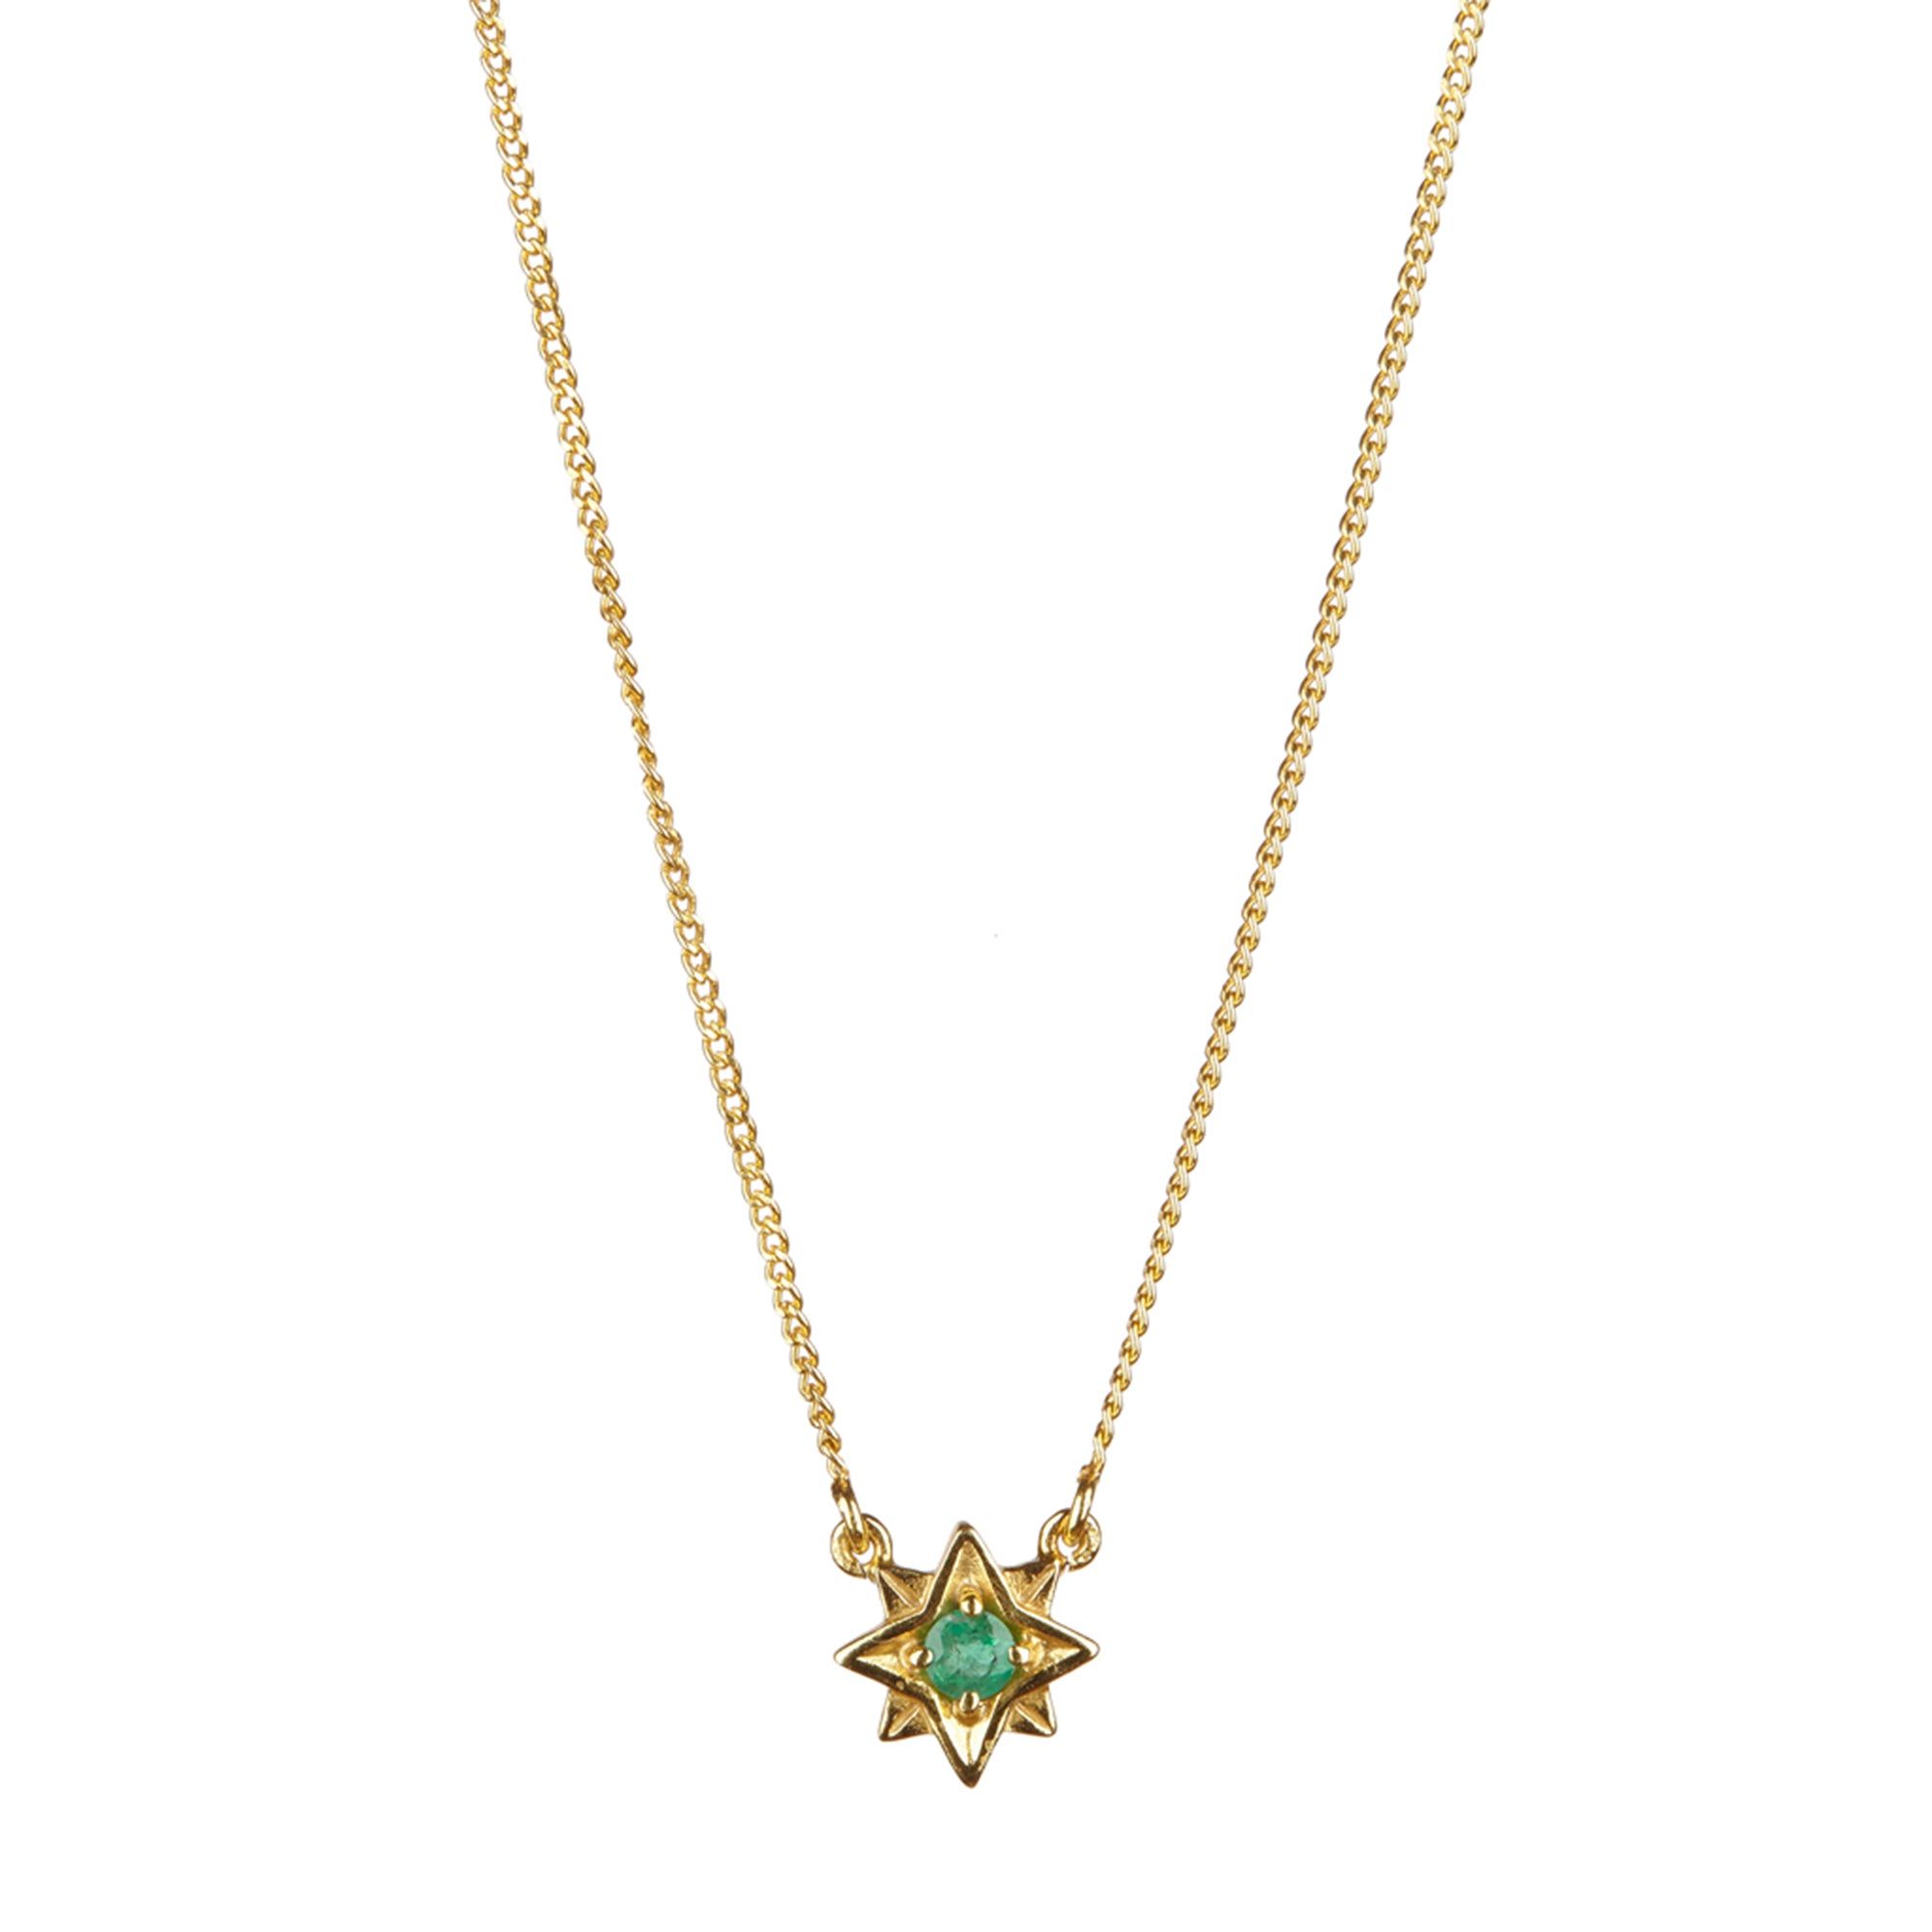 Guiding North Star Necklace - Gold Emerald